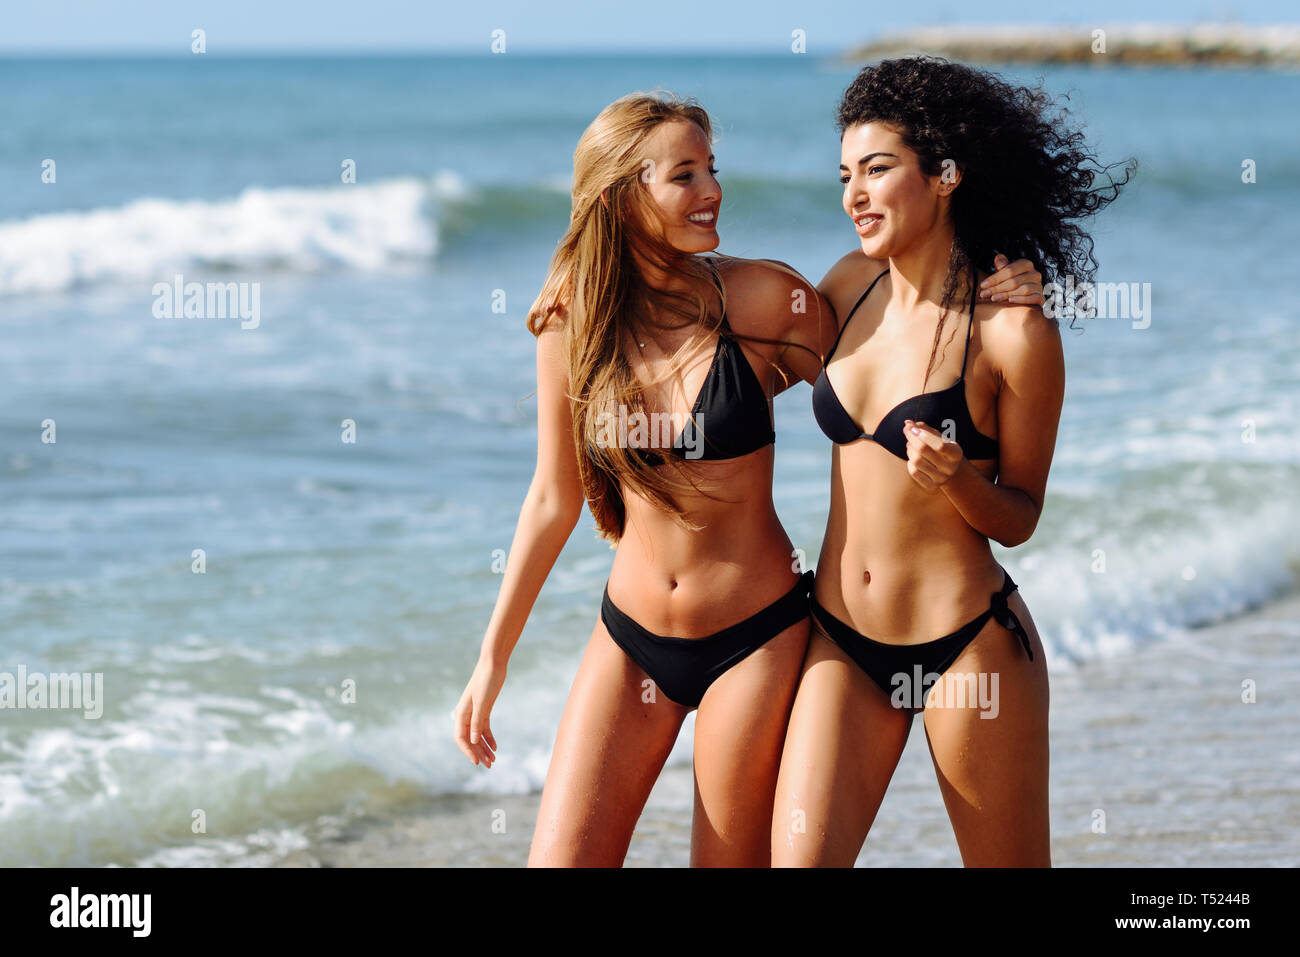 Two Young Women With Beautiful Bodies In Swimwear On A Tropical Beach Stock Photo Alamy